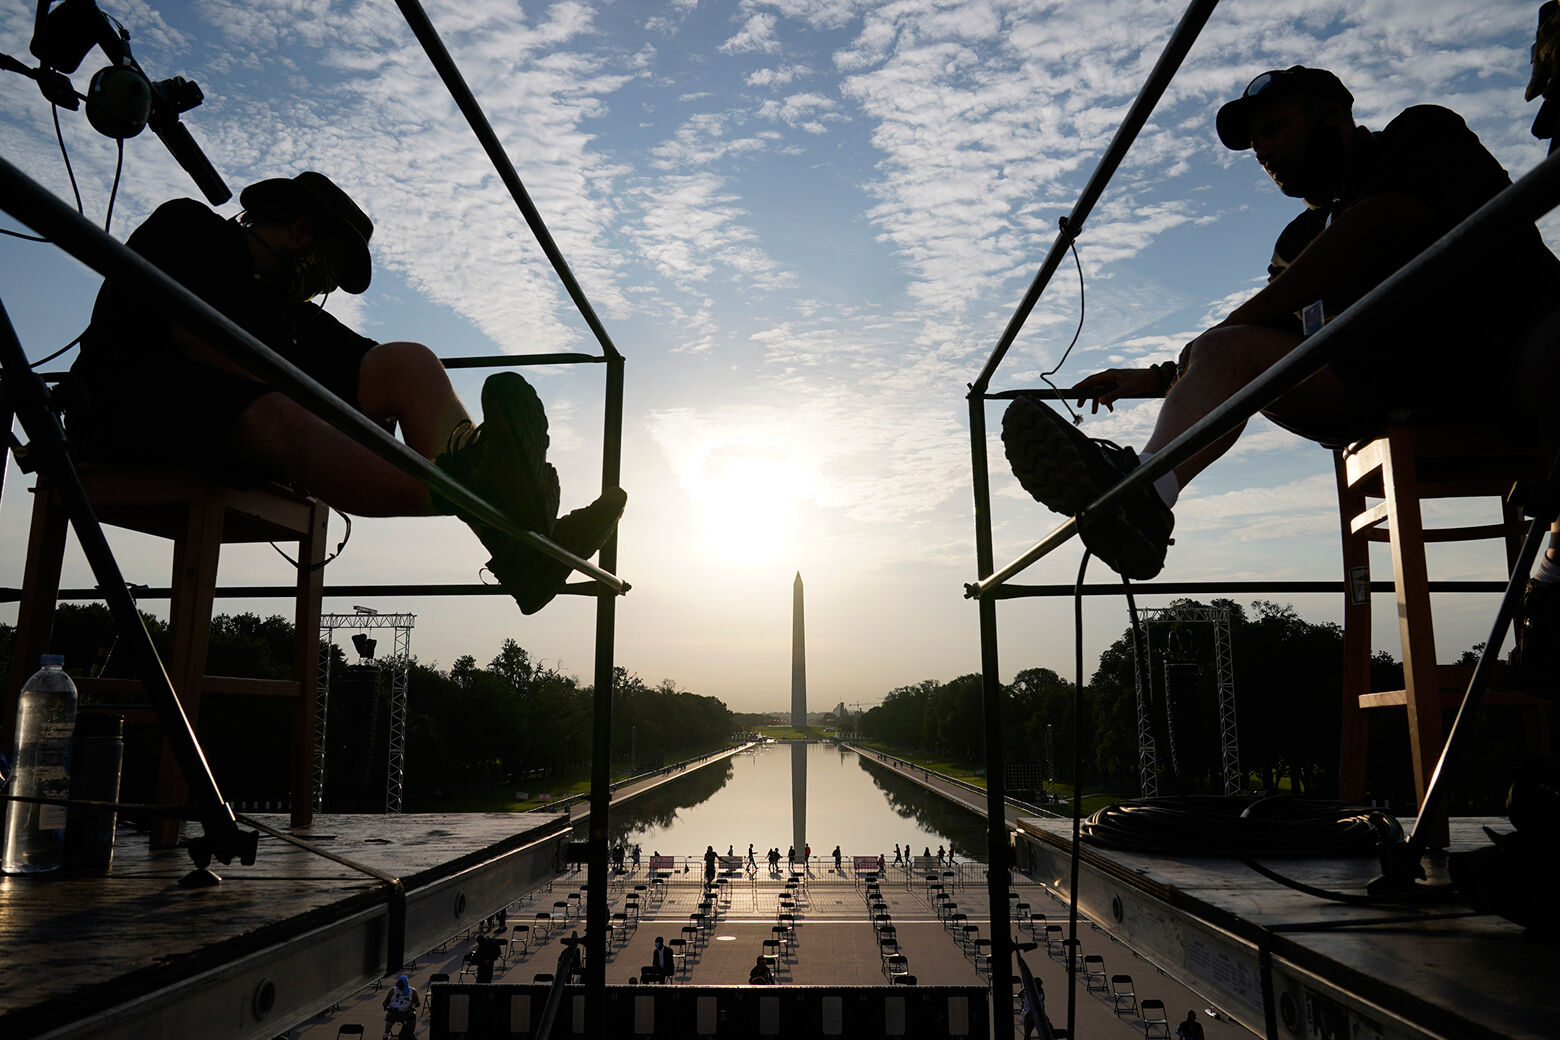 The early morning sun rises over the Washing ton Monument and the Reflecting Pool as final preparations are made for the March on Washington, Friday Aug. 28, 2020, at the Lincoln Memorial in Washington, on the 57th anniversary of the Rev. Martin Luther King Jr.'s "I Have A Dream" speech. (AP Photo/Jacquelyn Martin)